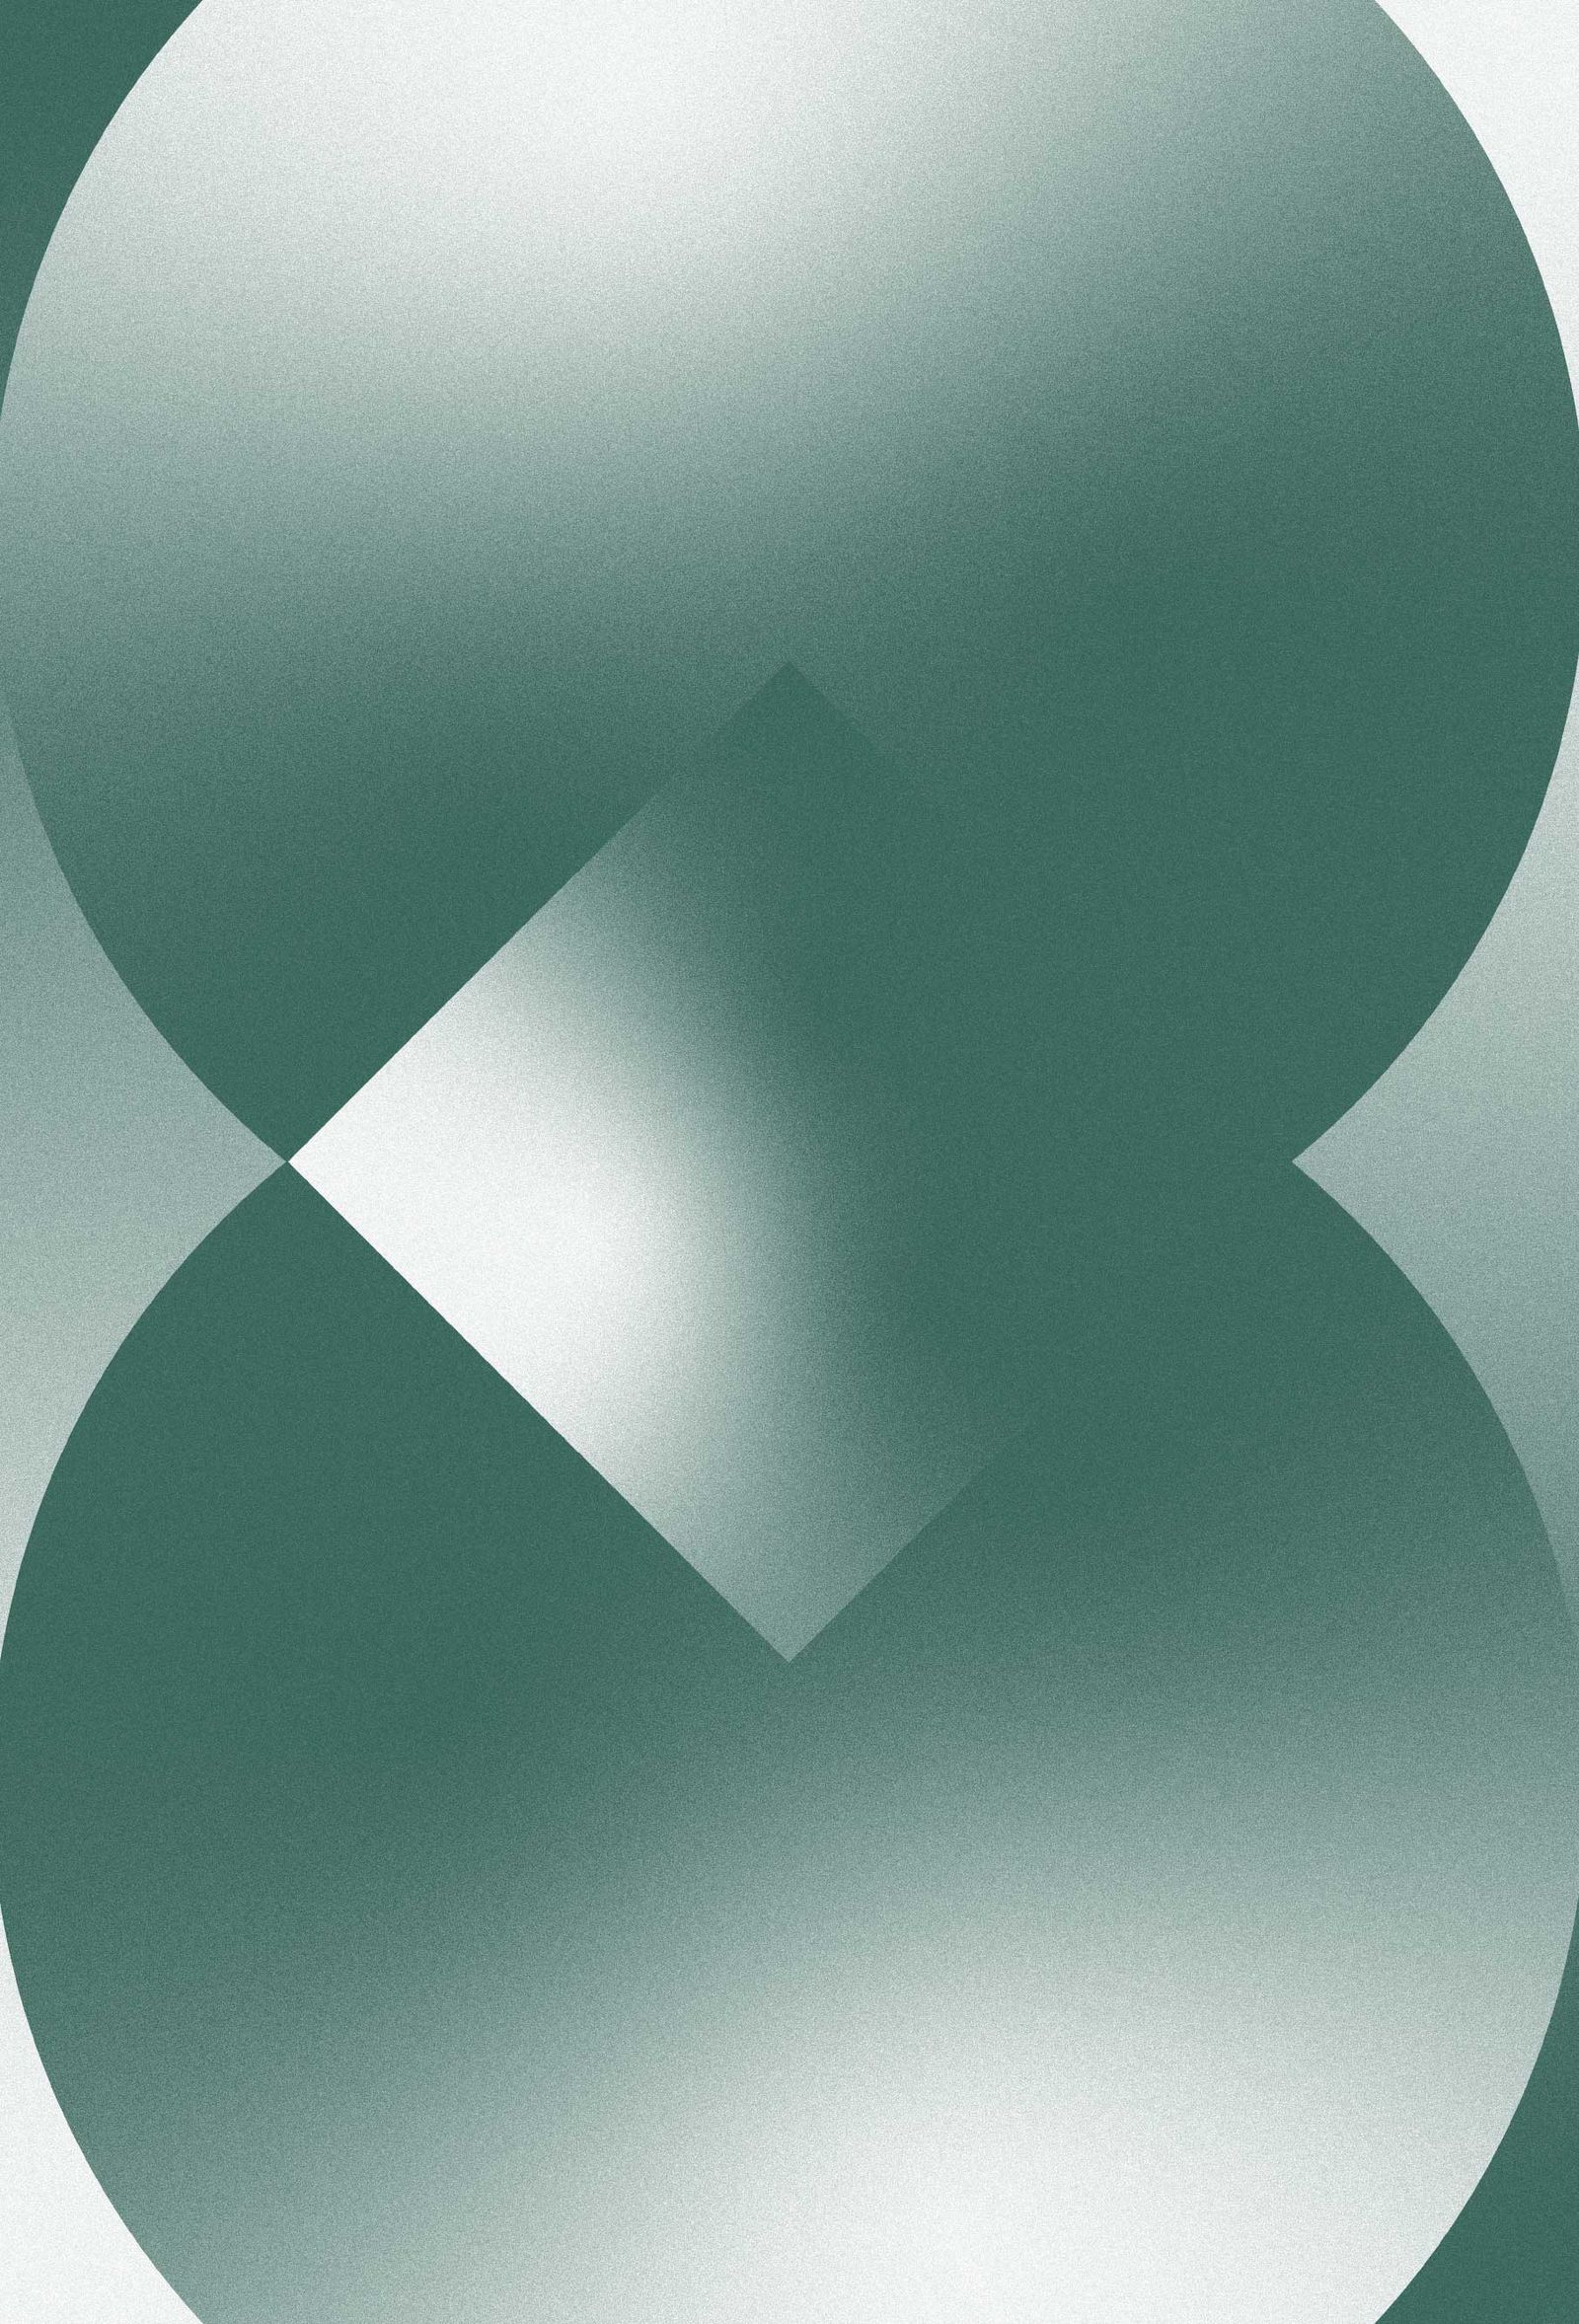 Geometric pattern of circles and a triangle in green